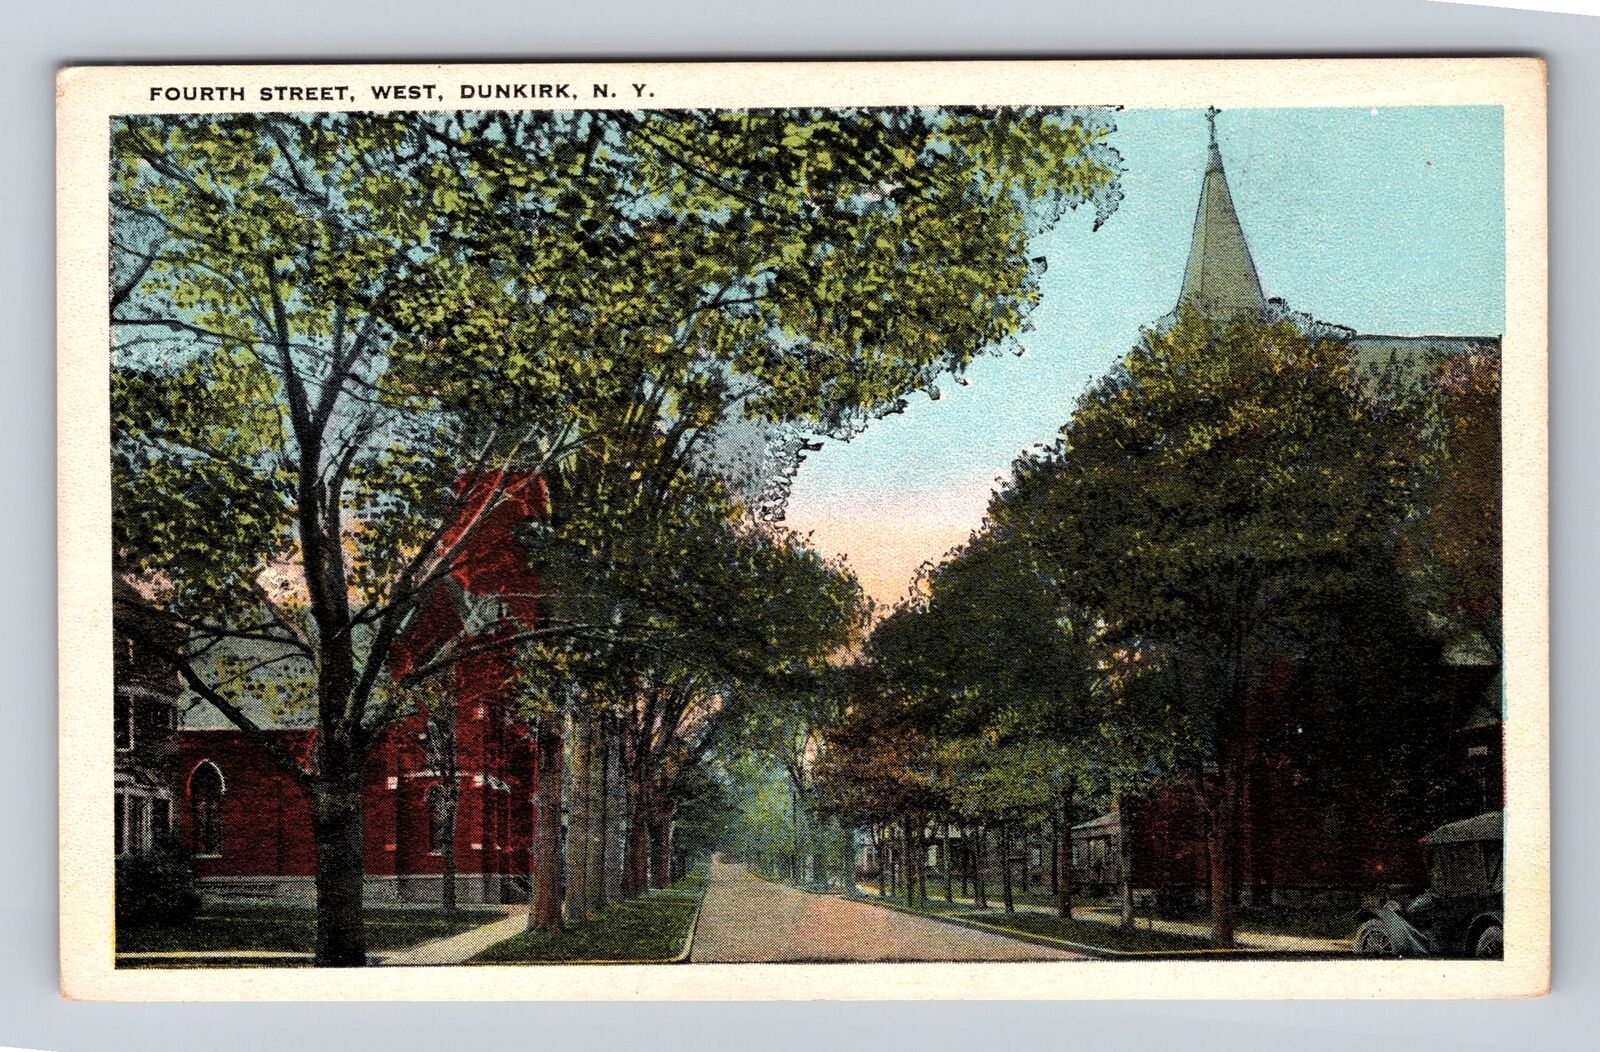 Dunkirk NY-New York, View Of Fourth Street West, Church, Vintage Postcard